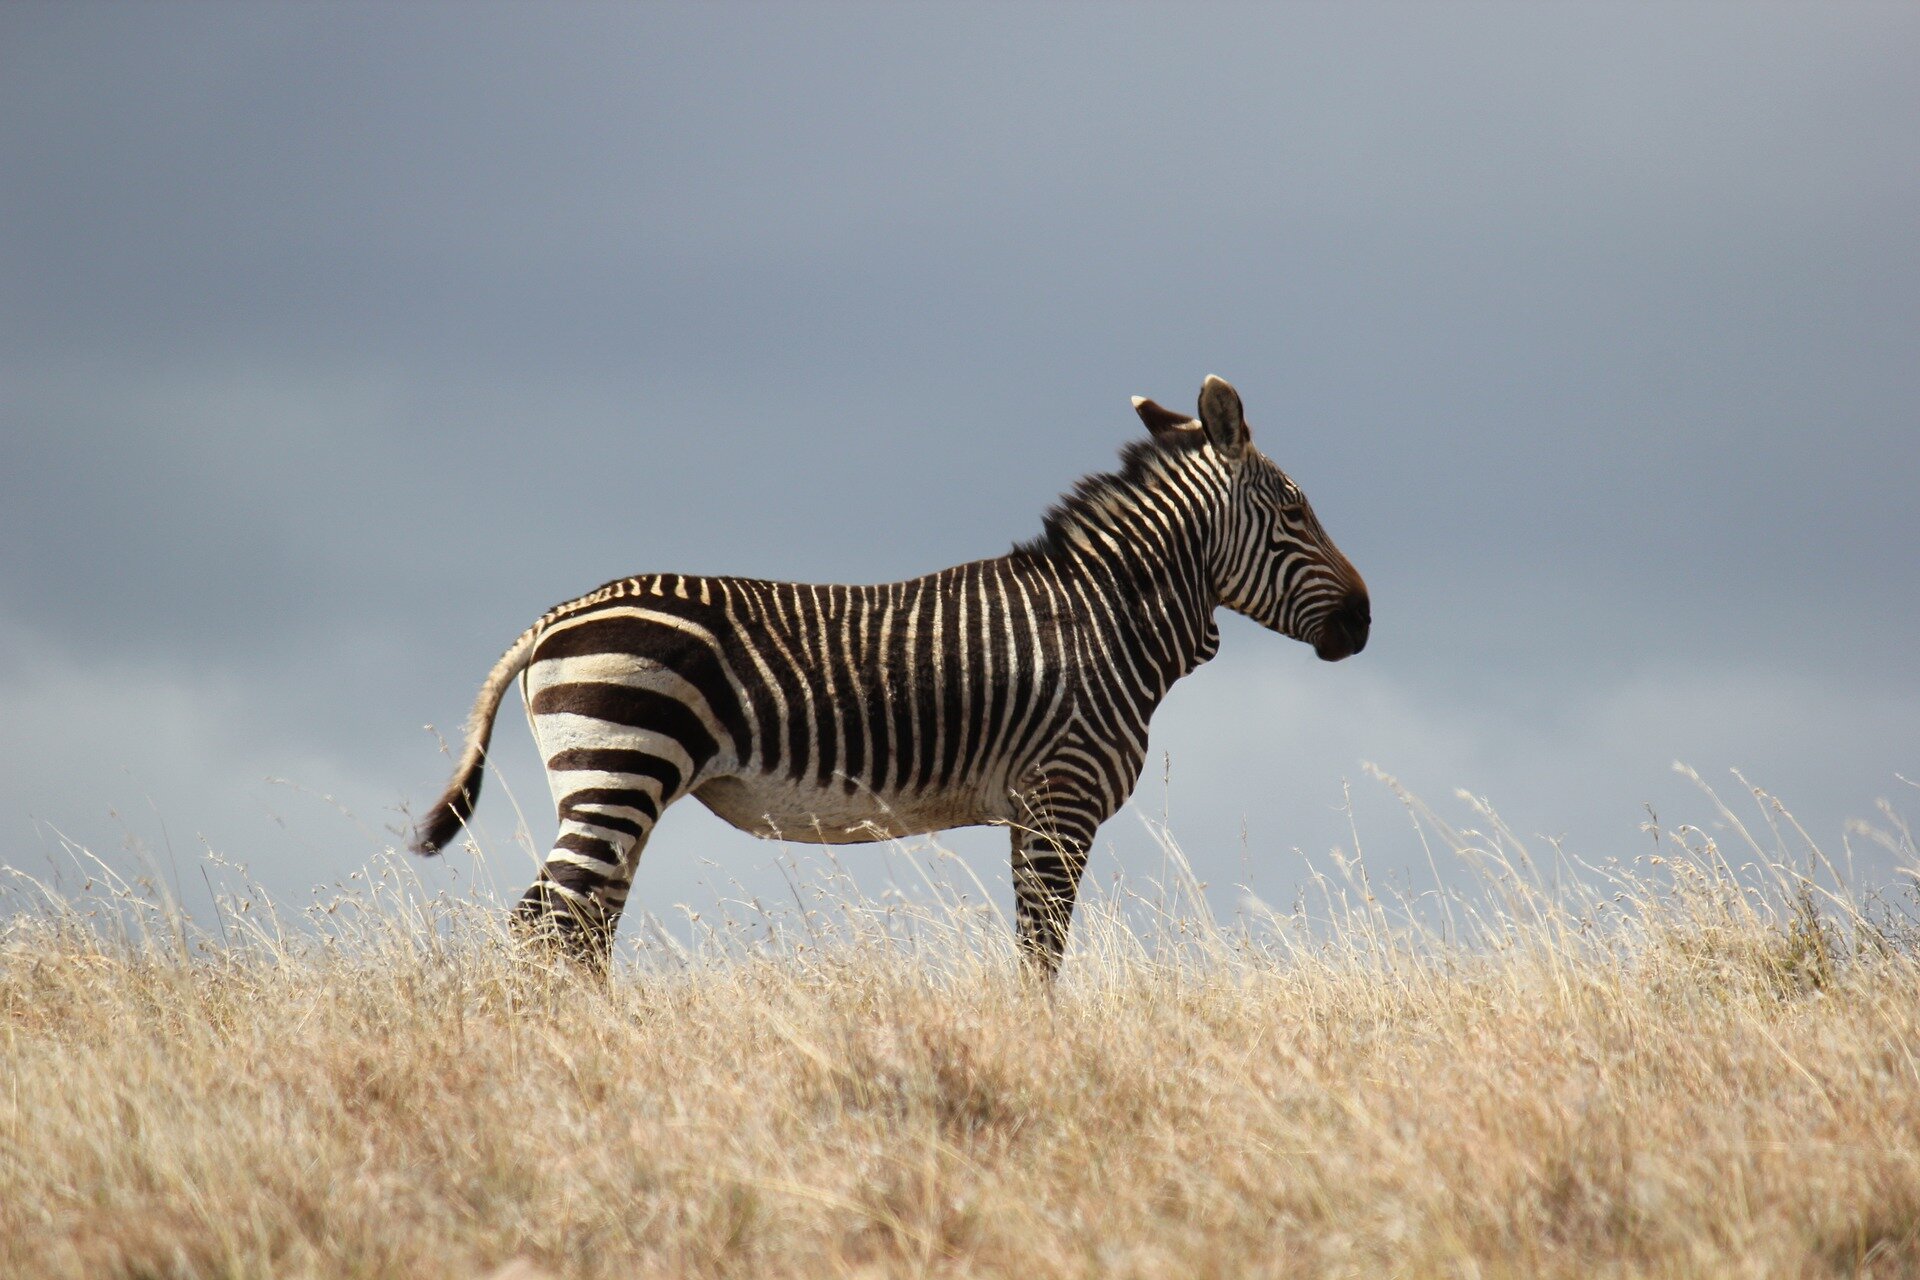 #How vacation photos of zebras and whales can help conservation